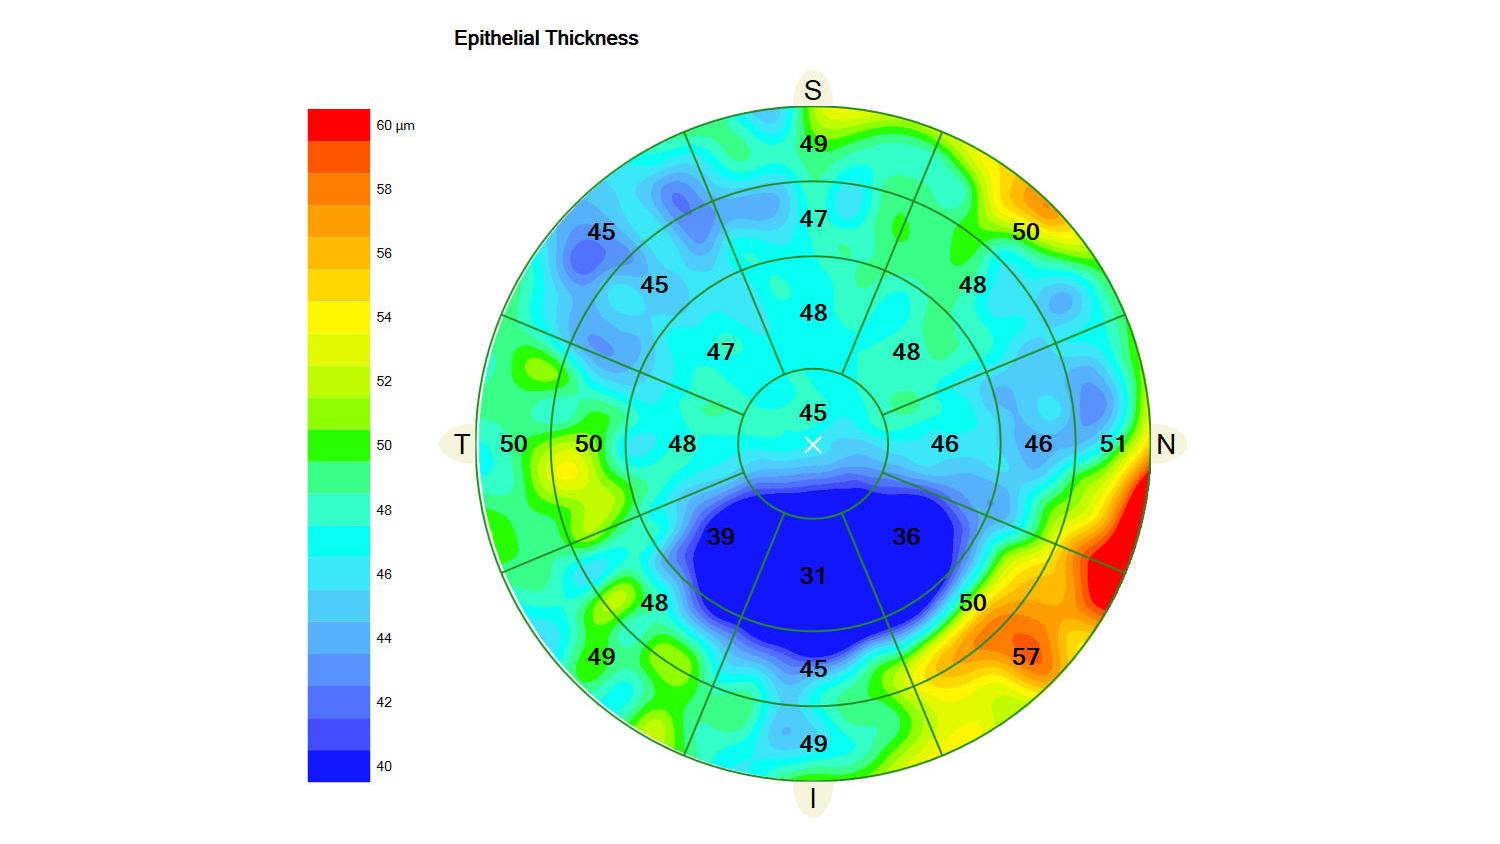 ZEISS CIRRUS Epithelial Thickness Mapping